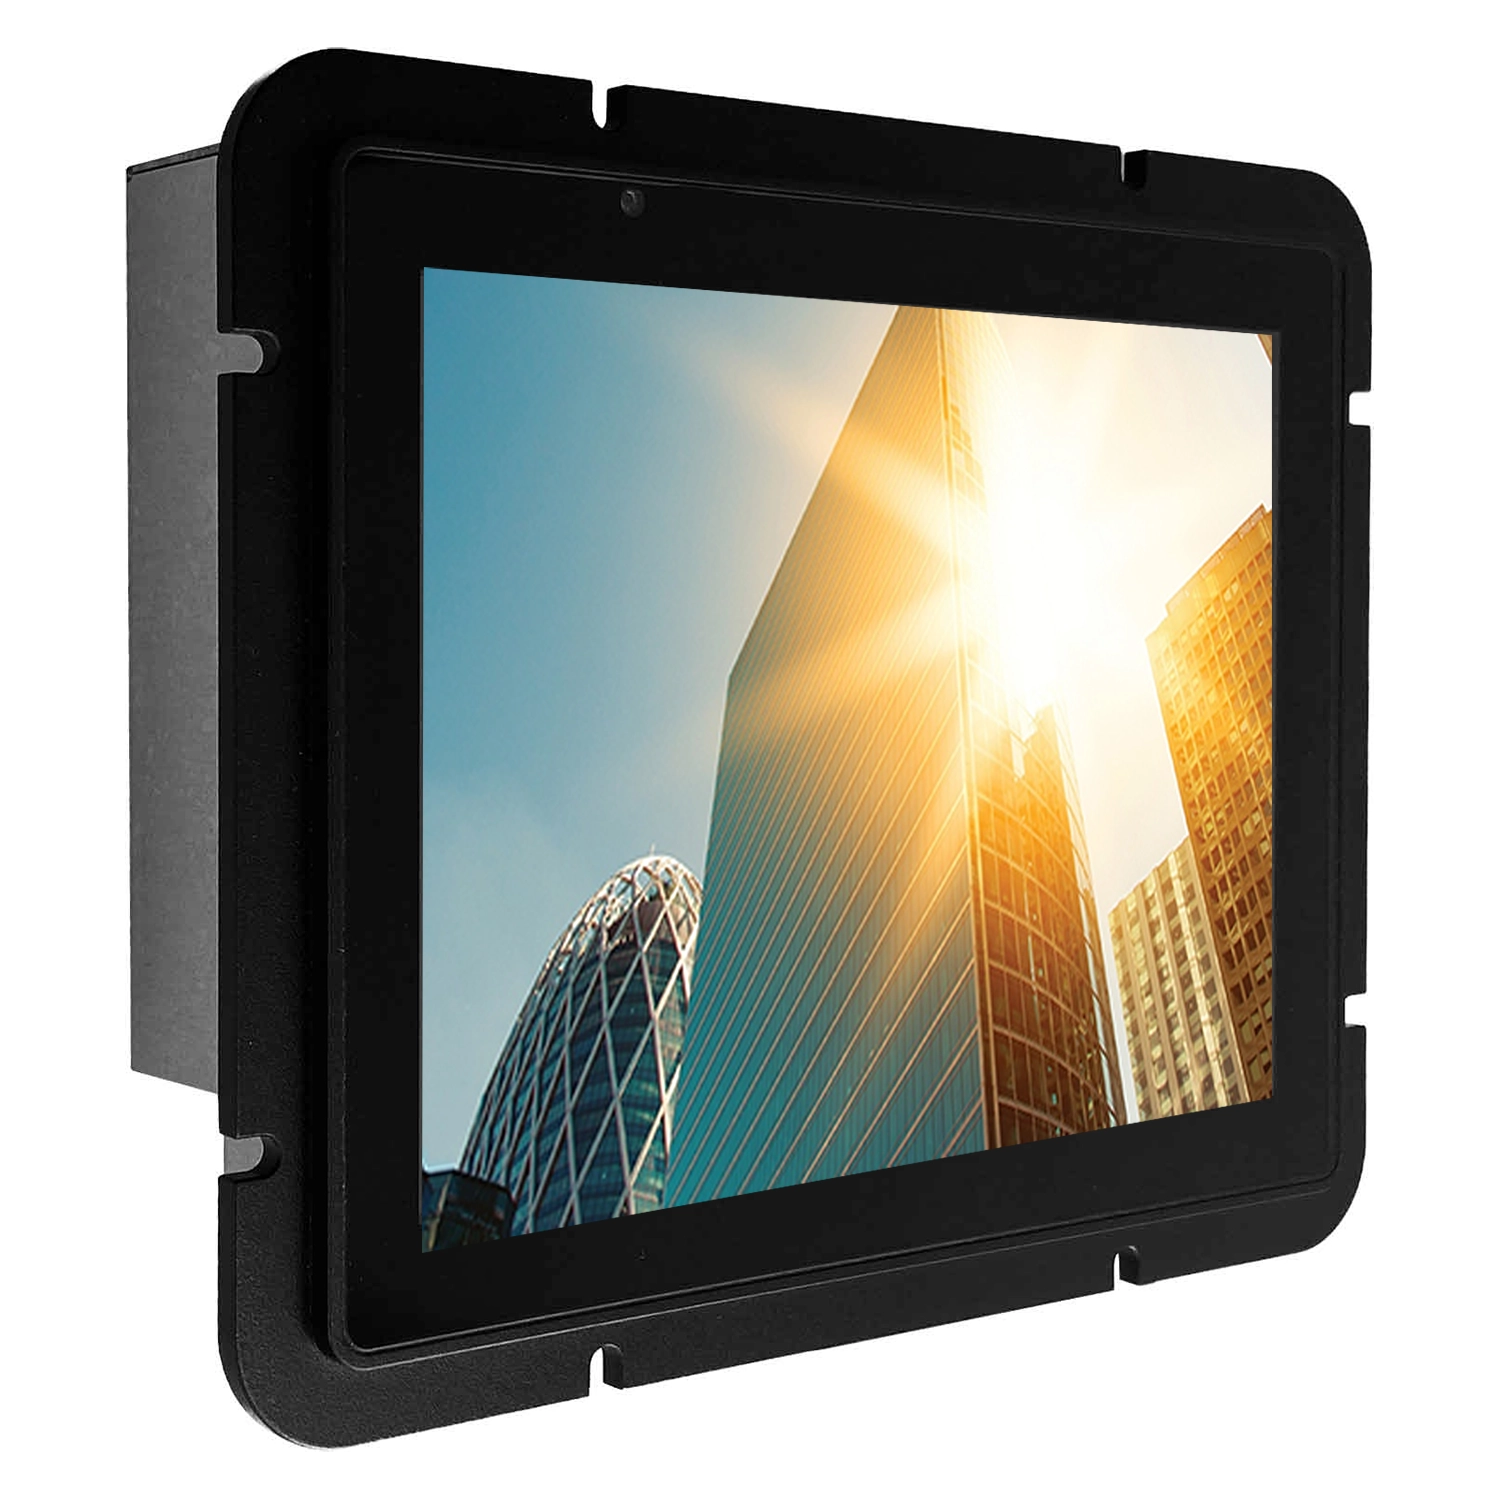 INDUSTRIAL OPEN FRAME HIGH BRIGHT TOUCH MONITOR KEETOUCH 8’’ KT-008-CHWS0M1